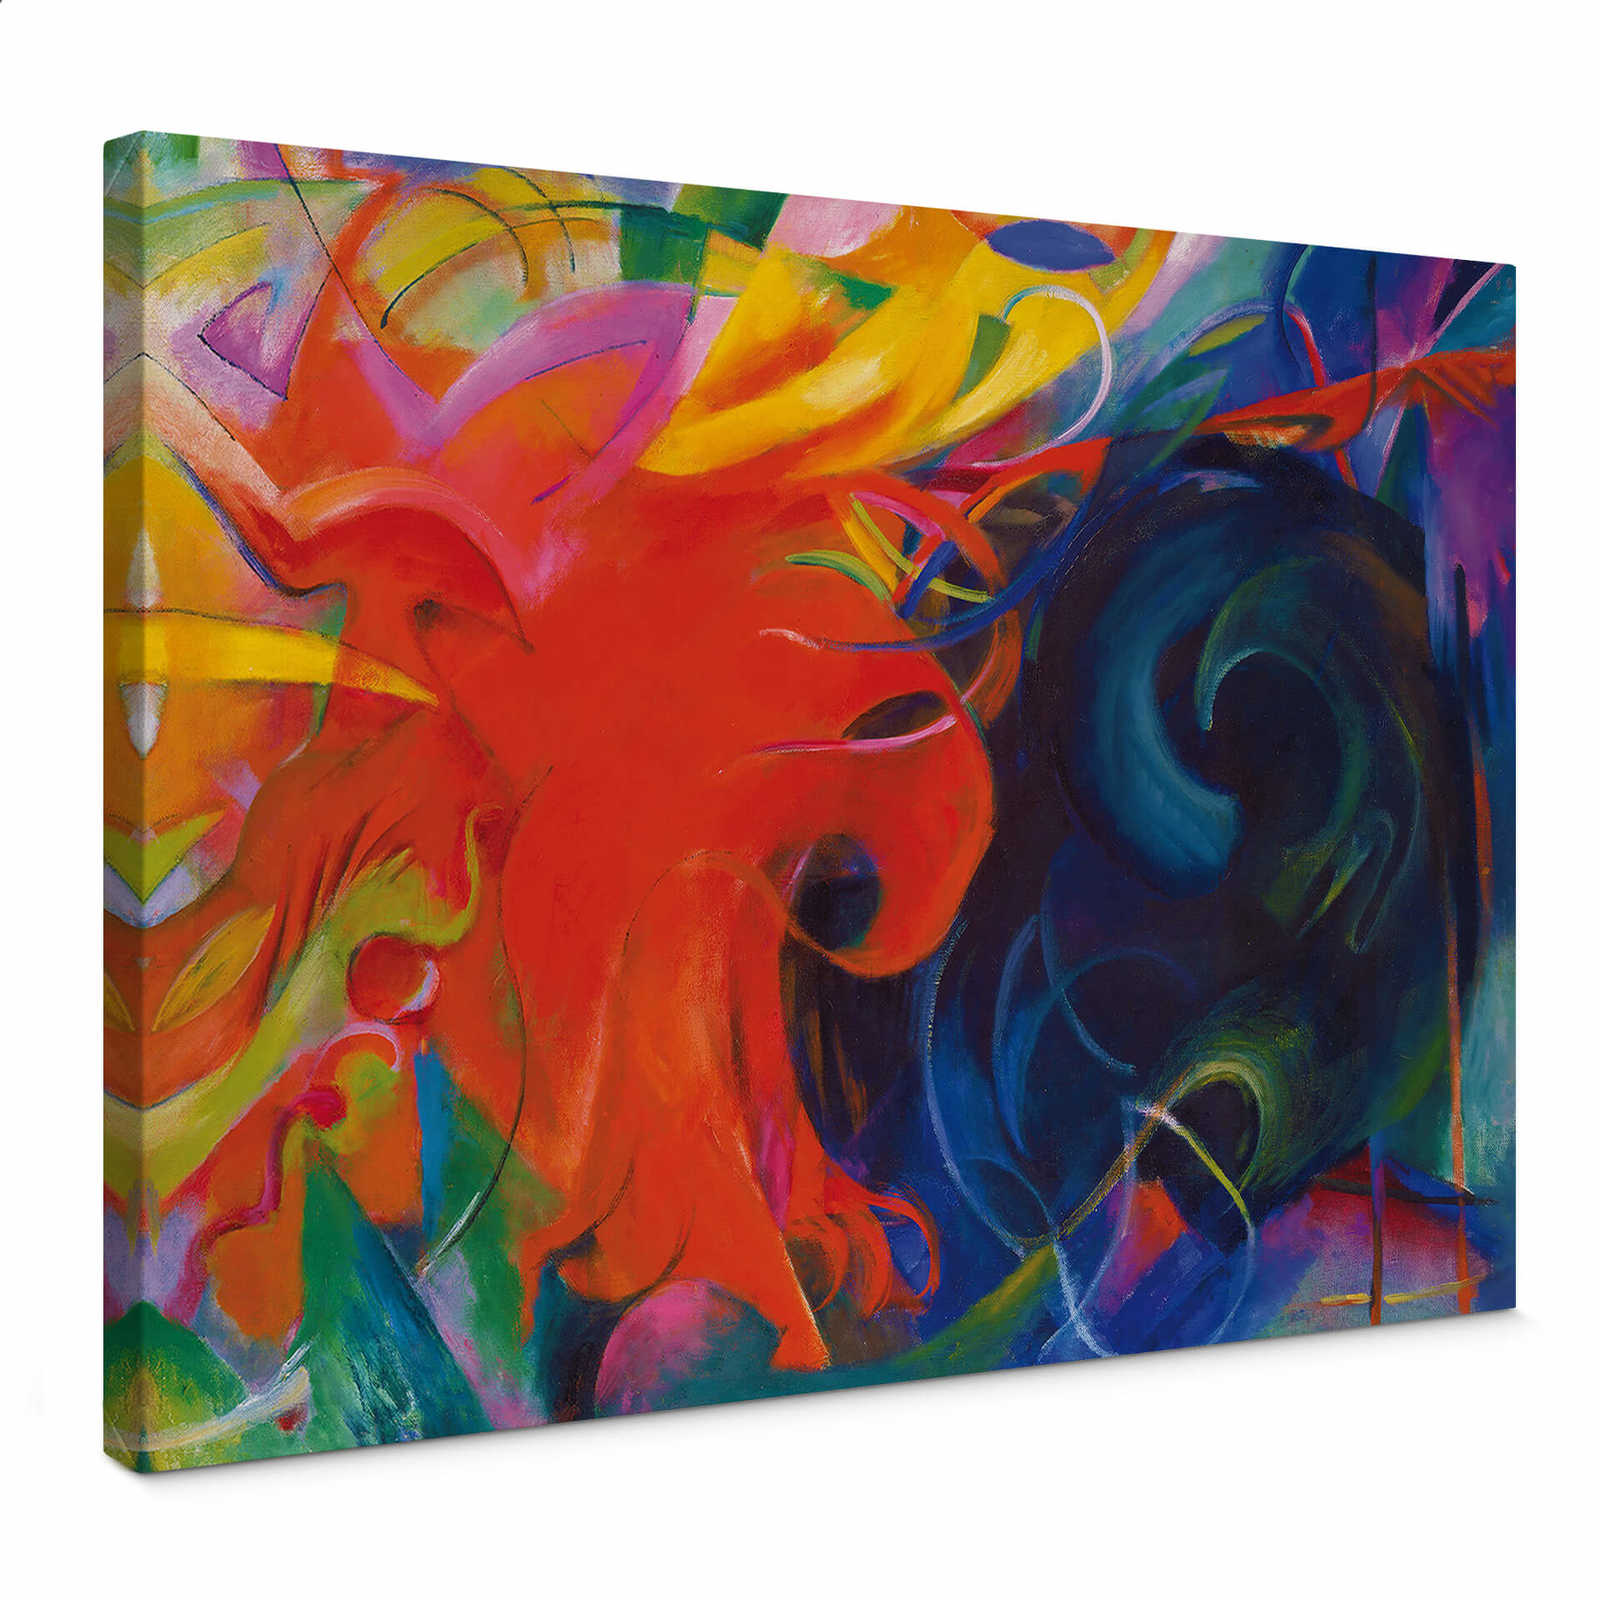         Canvas print "Fighting figures" by Franz Marc
    